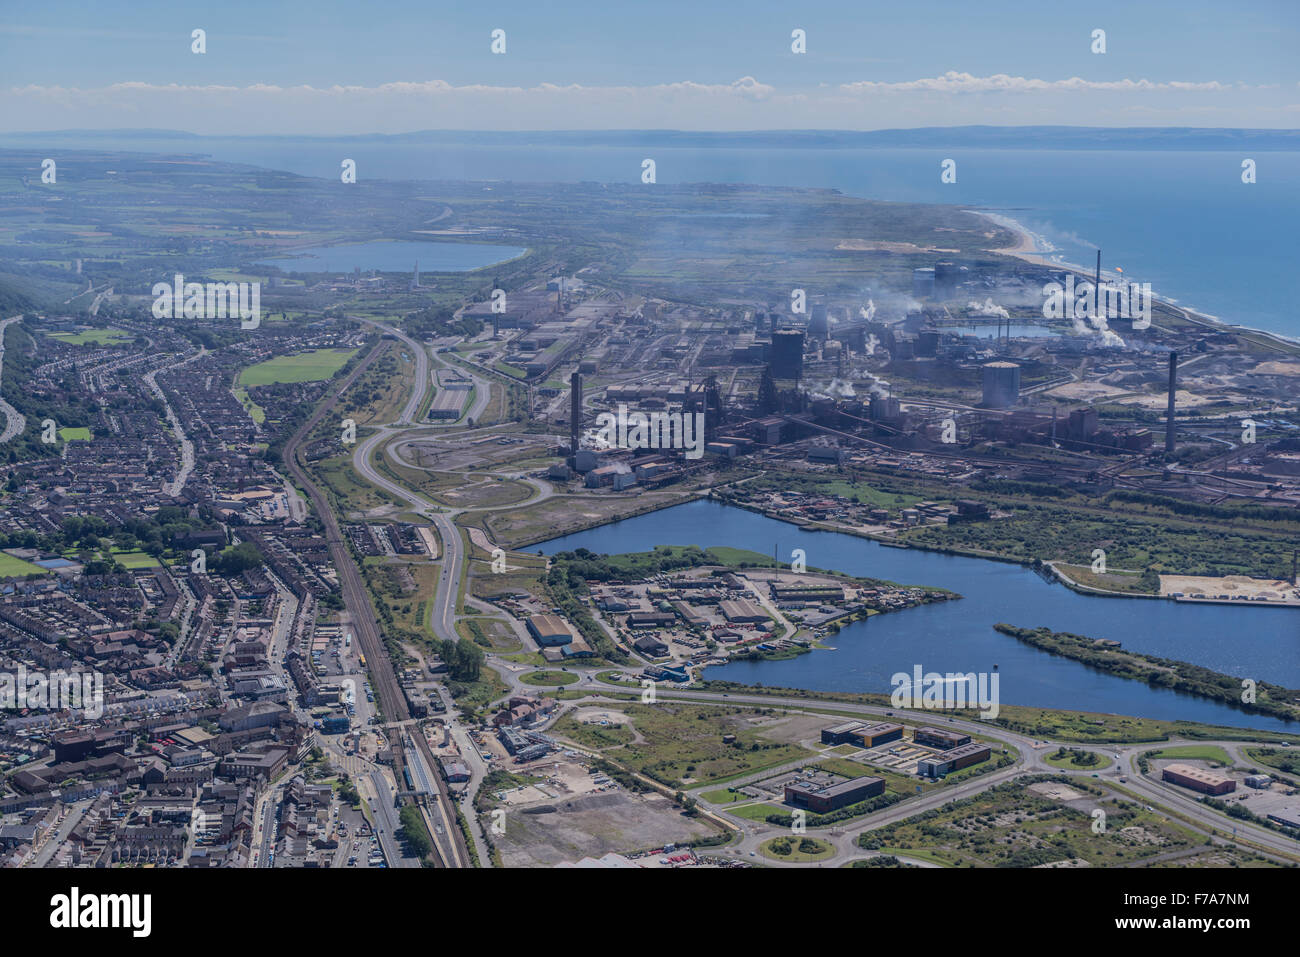 Aerial views of Port Talbot Steelworks and the South Wales Coast, Wales, UK 1st August 2015 PHILLIP ROBERTS Stock Photo